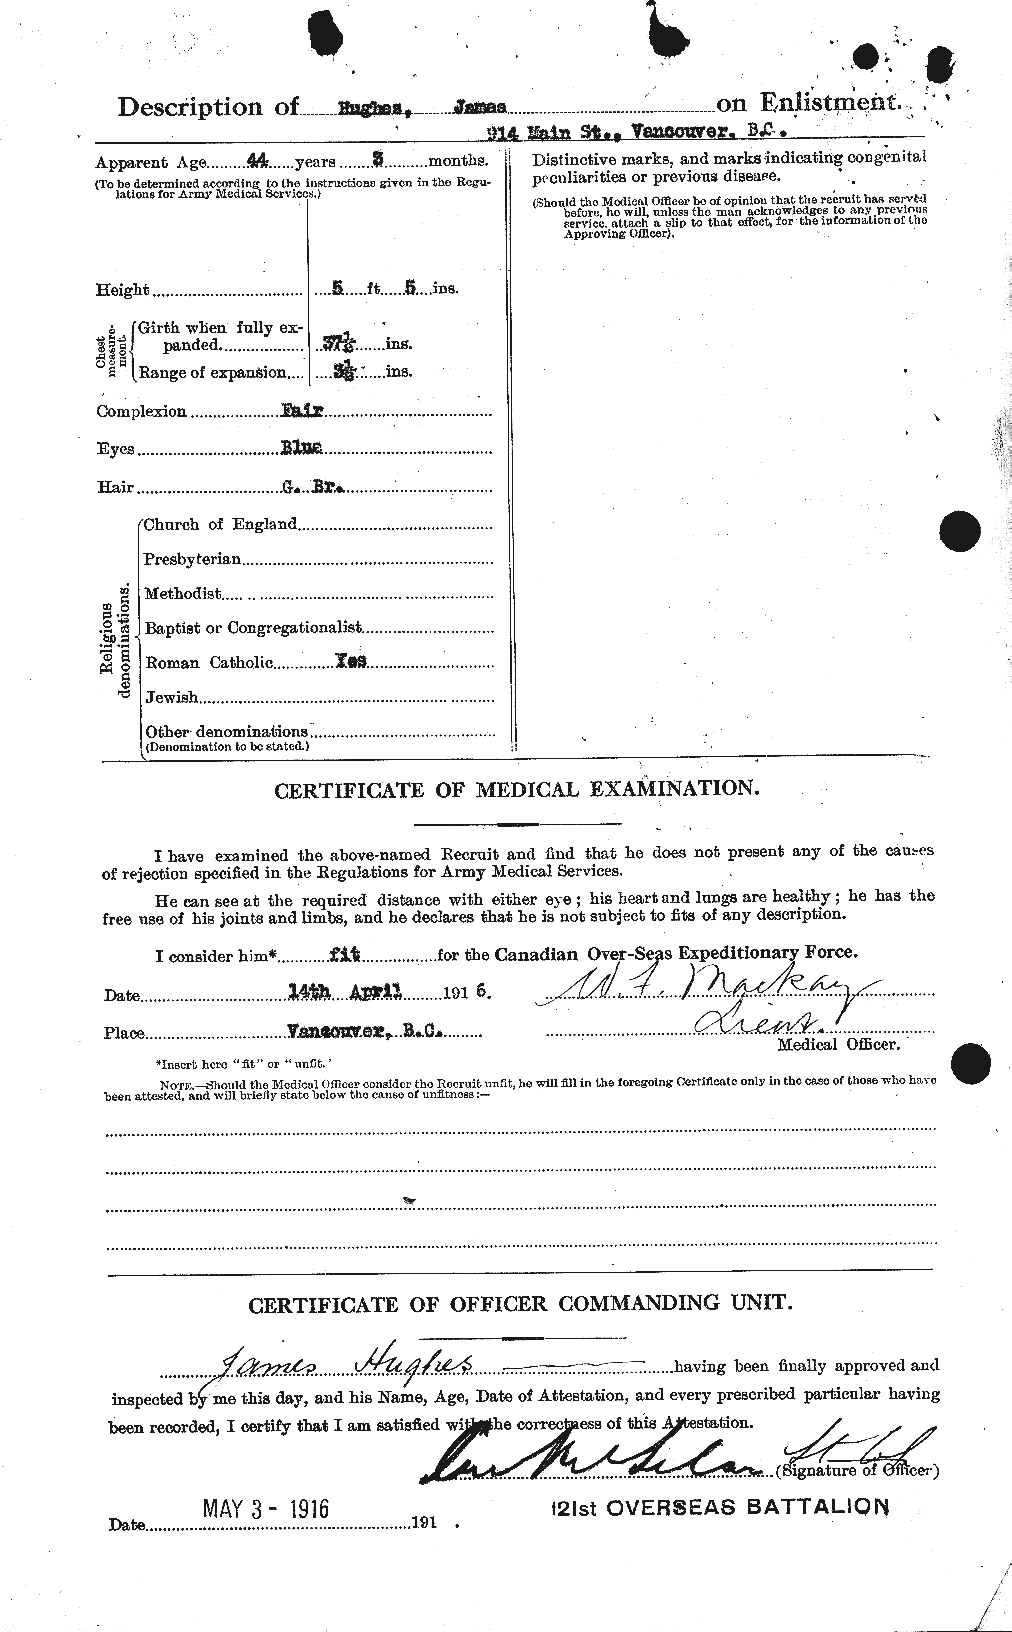 Personnel Records of the First World War - CEF 403951b